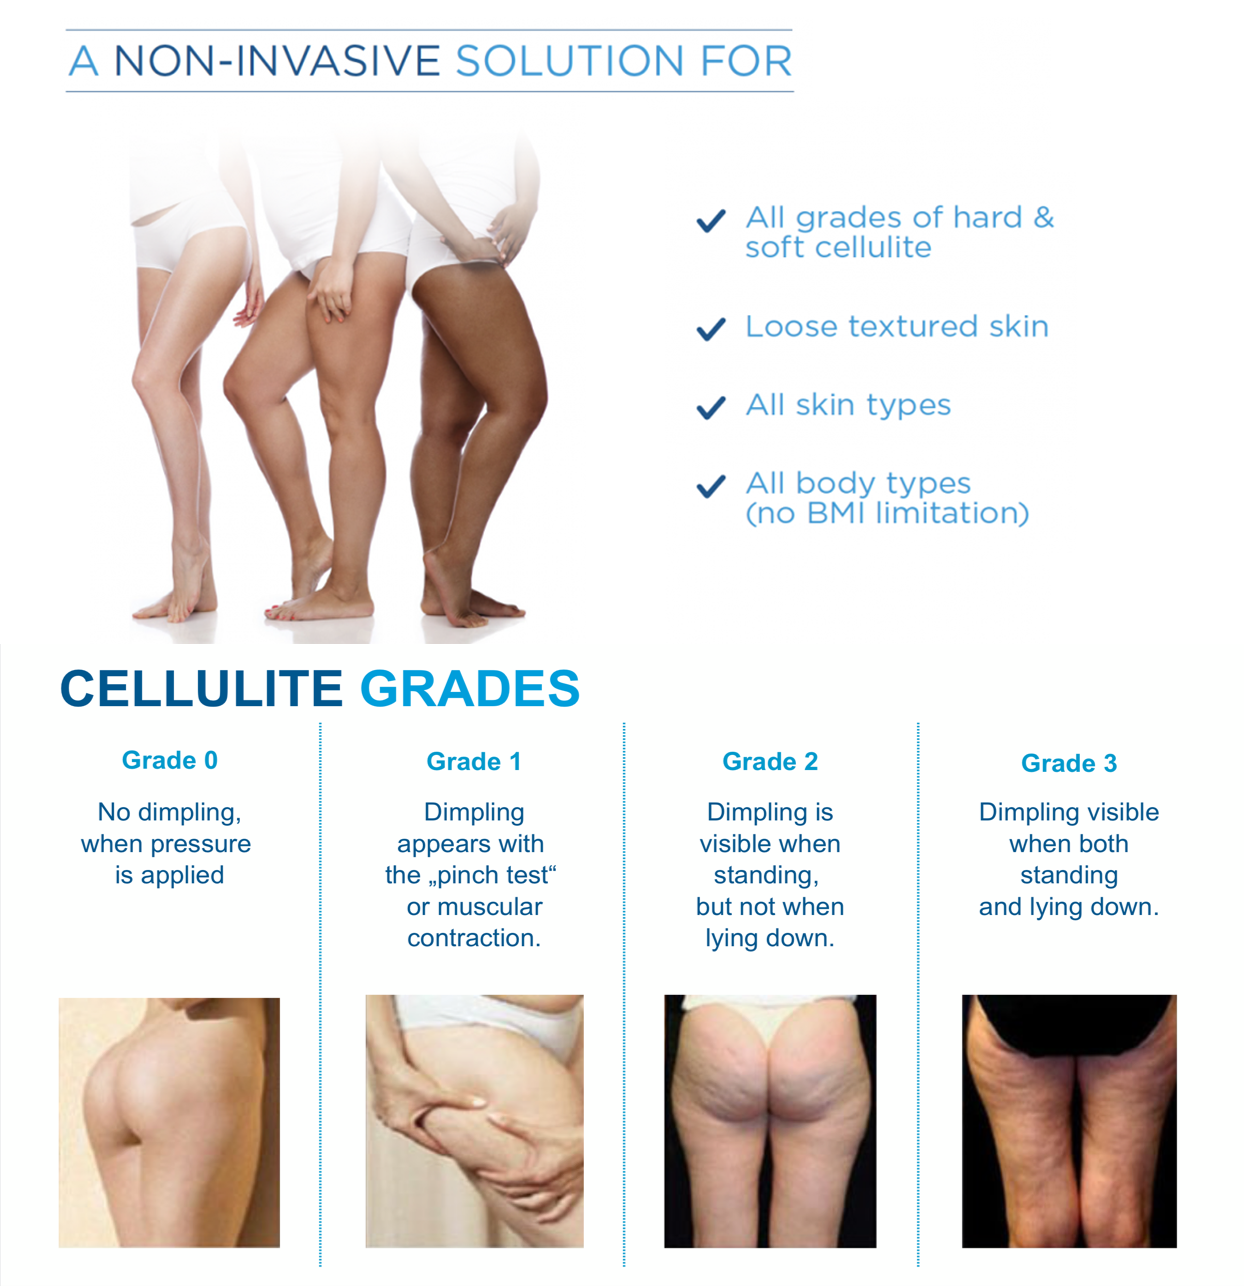 cellulite-grades-all-grades-in-1-for-webpage